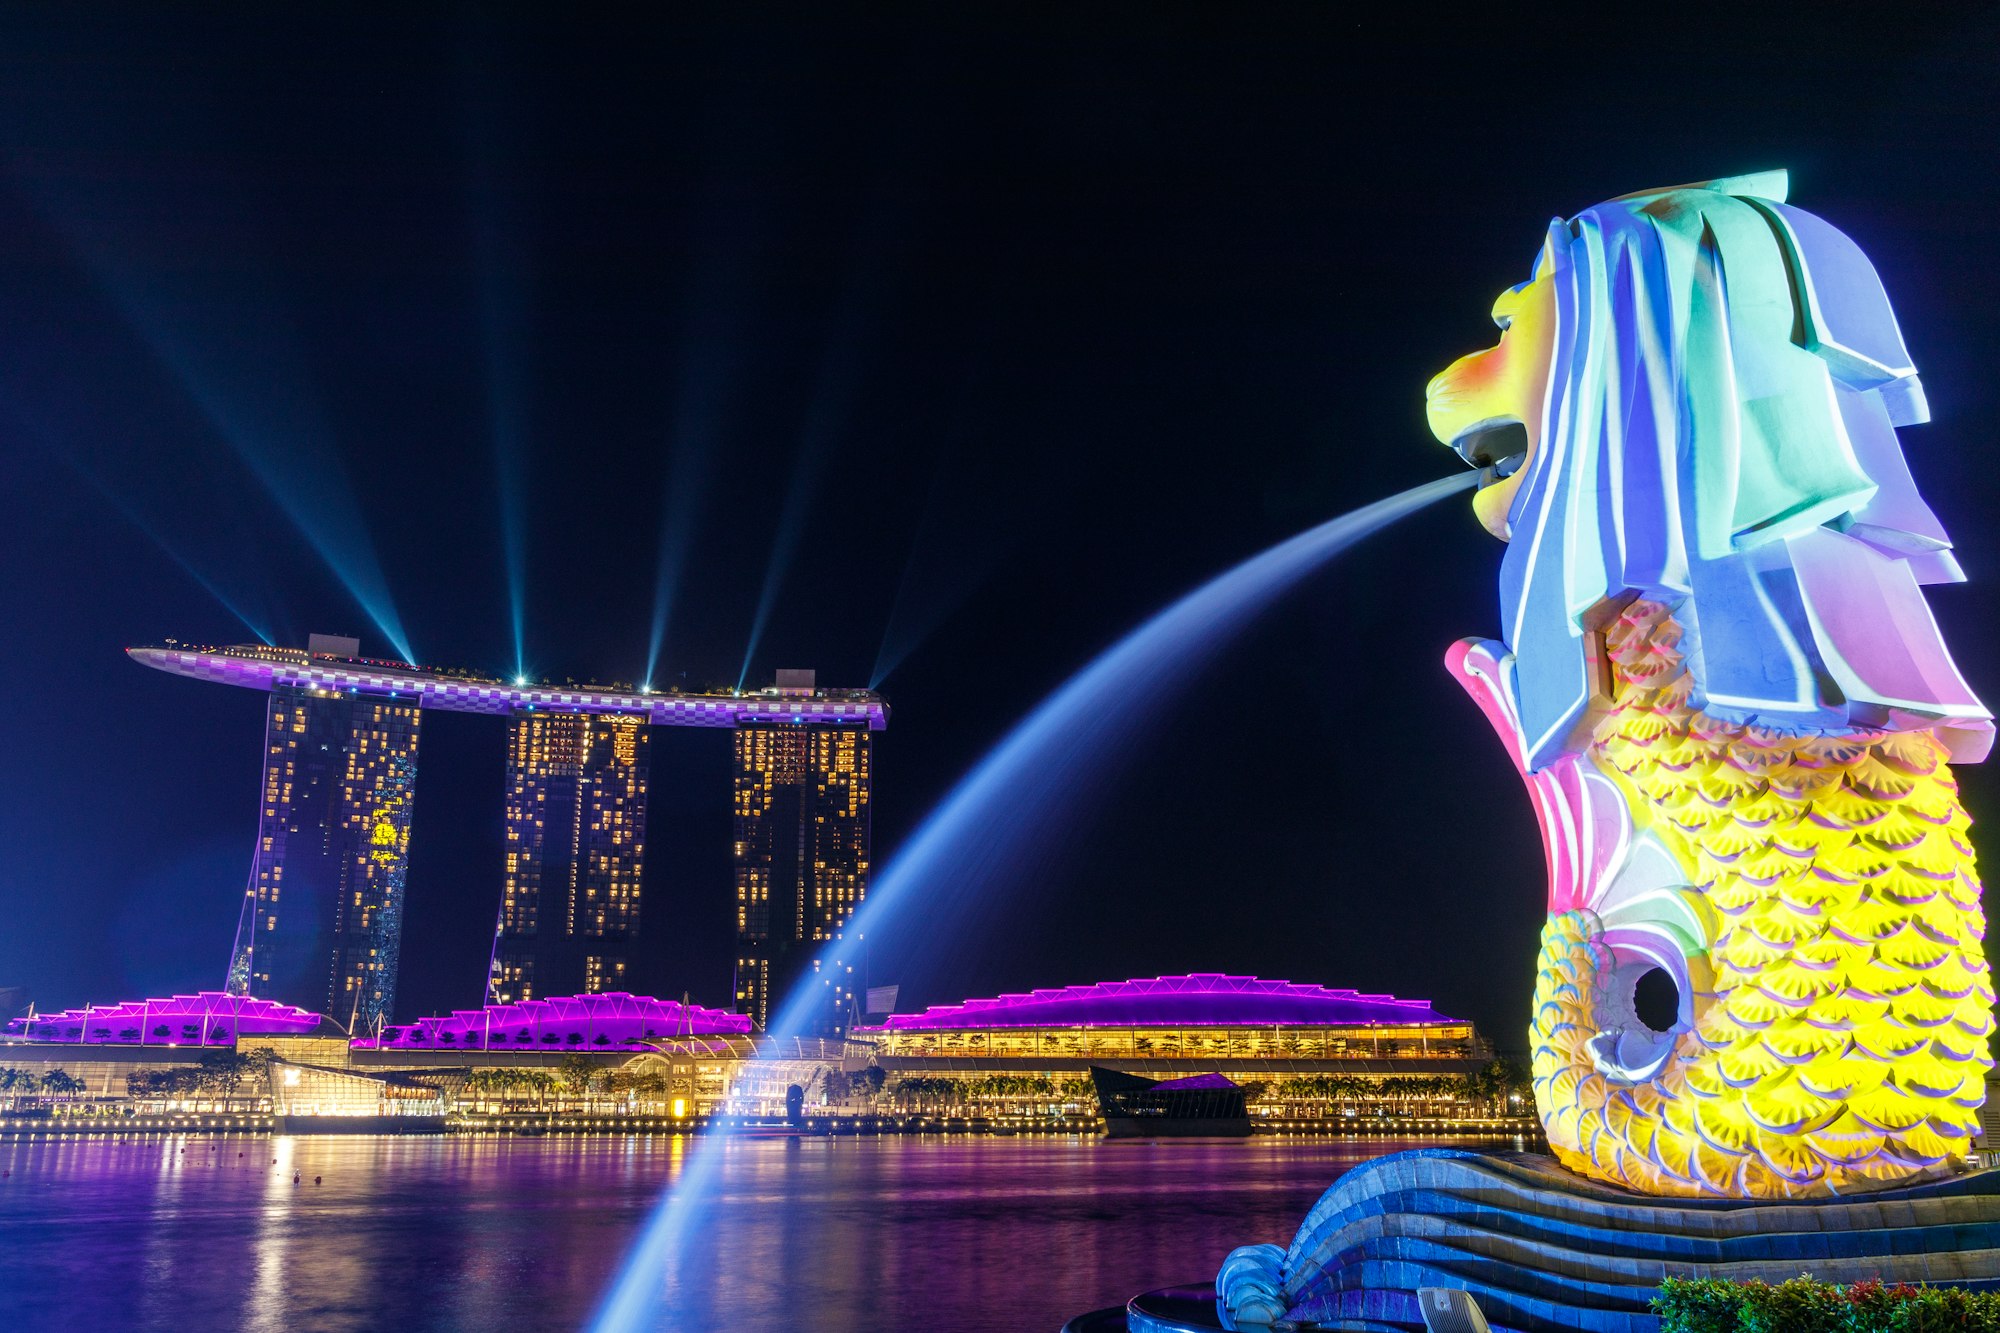 https://thehalalplanet.com Lights shone on the Merlion as it overlooks Singapore's iconic Marina Bay Sands. During the Formula 1 Grand Prix night race, lights were projected onto the Merlion and the 'boat' of Marina Bay Sands.